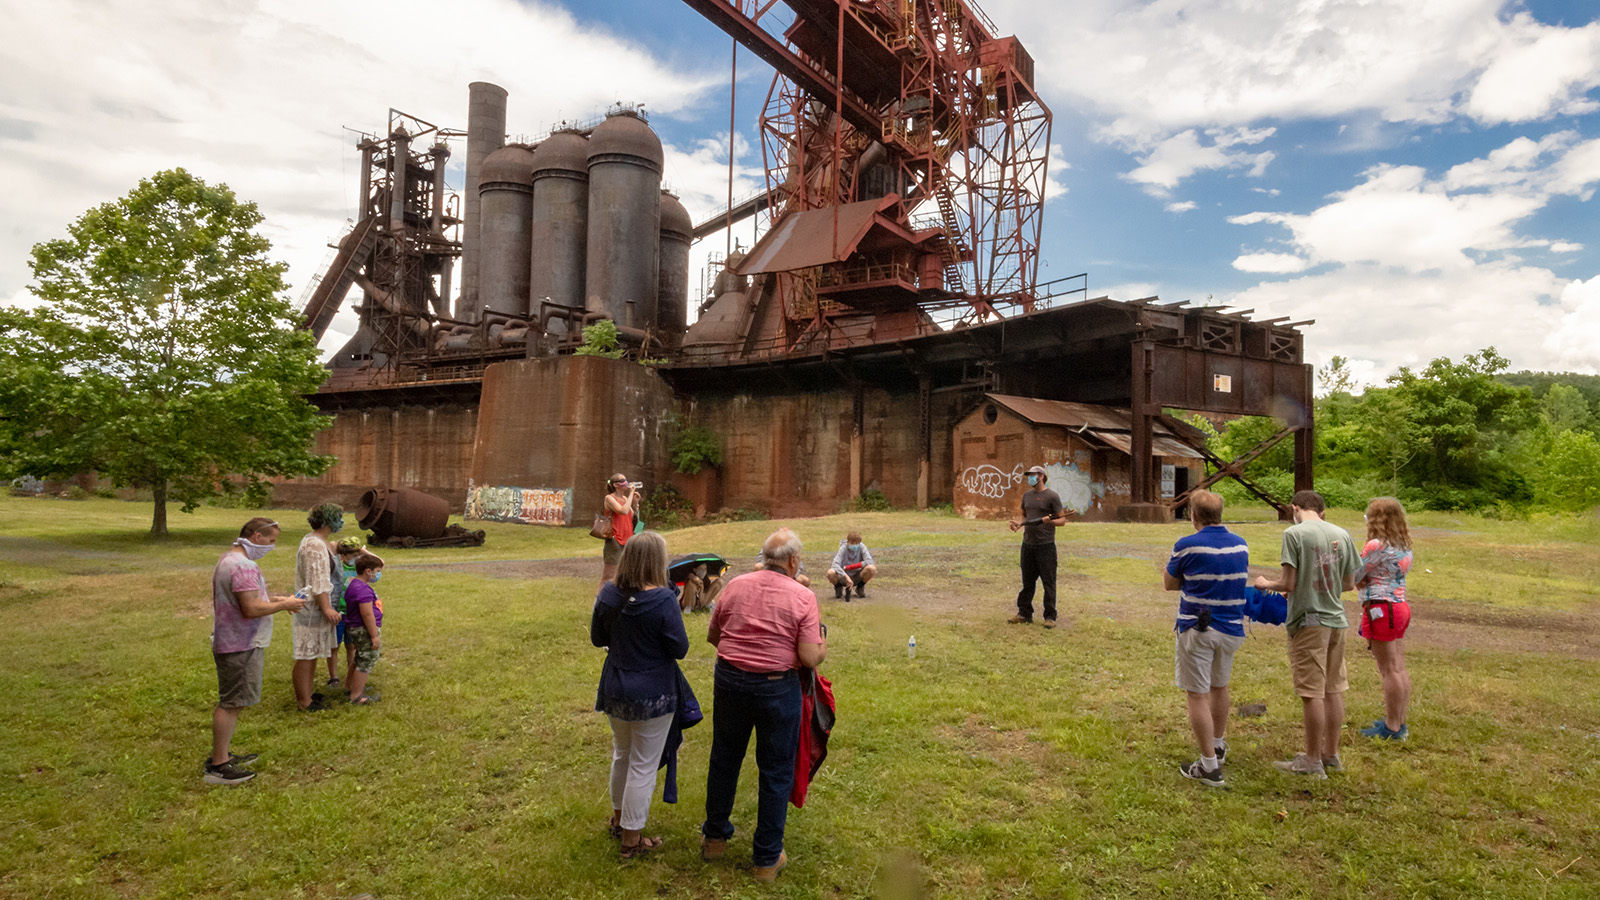 Clusters of Families stand six feet or more apart in the ore yard.